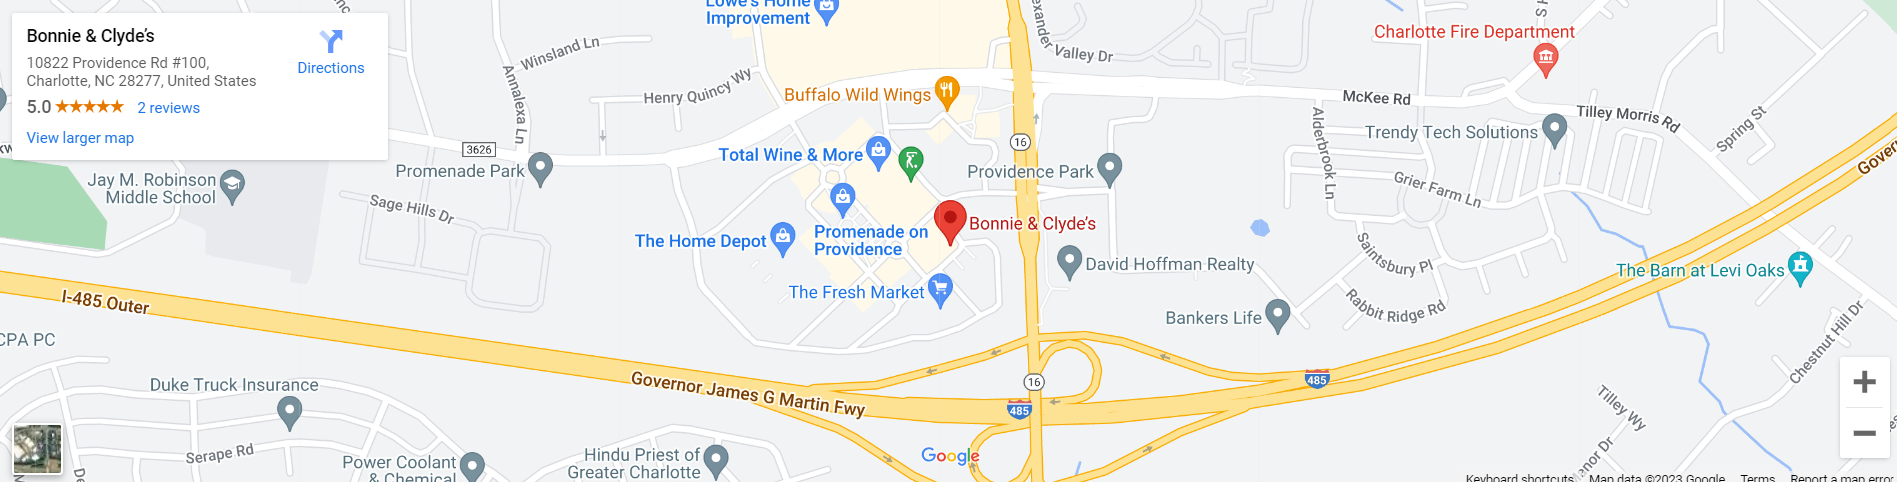 A map showing the location of a business.